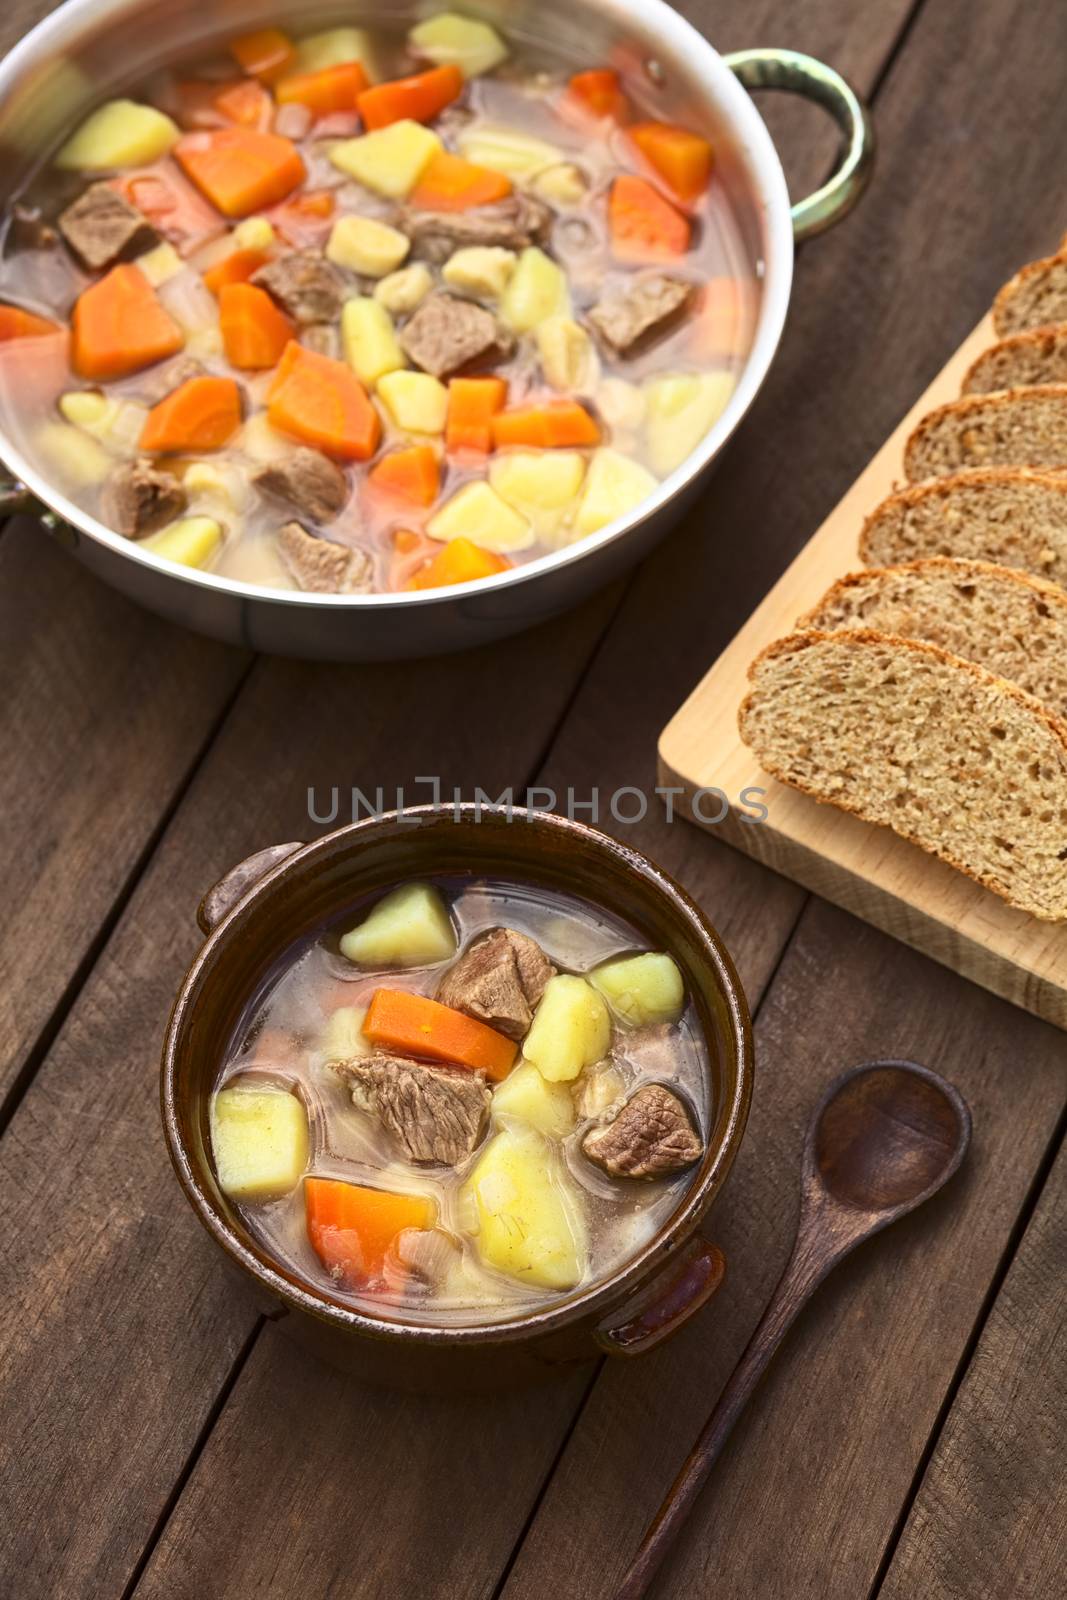 Bowl filled with traditional Hungarian soup called Gulyasleves made of beef, potato, carrot, onion, csipetke (homemade pasta) and seasoned with salt and paprika (Selective Focus, Focus on the lower half of the soup in the bowl)